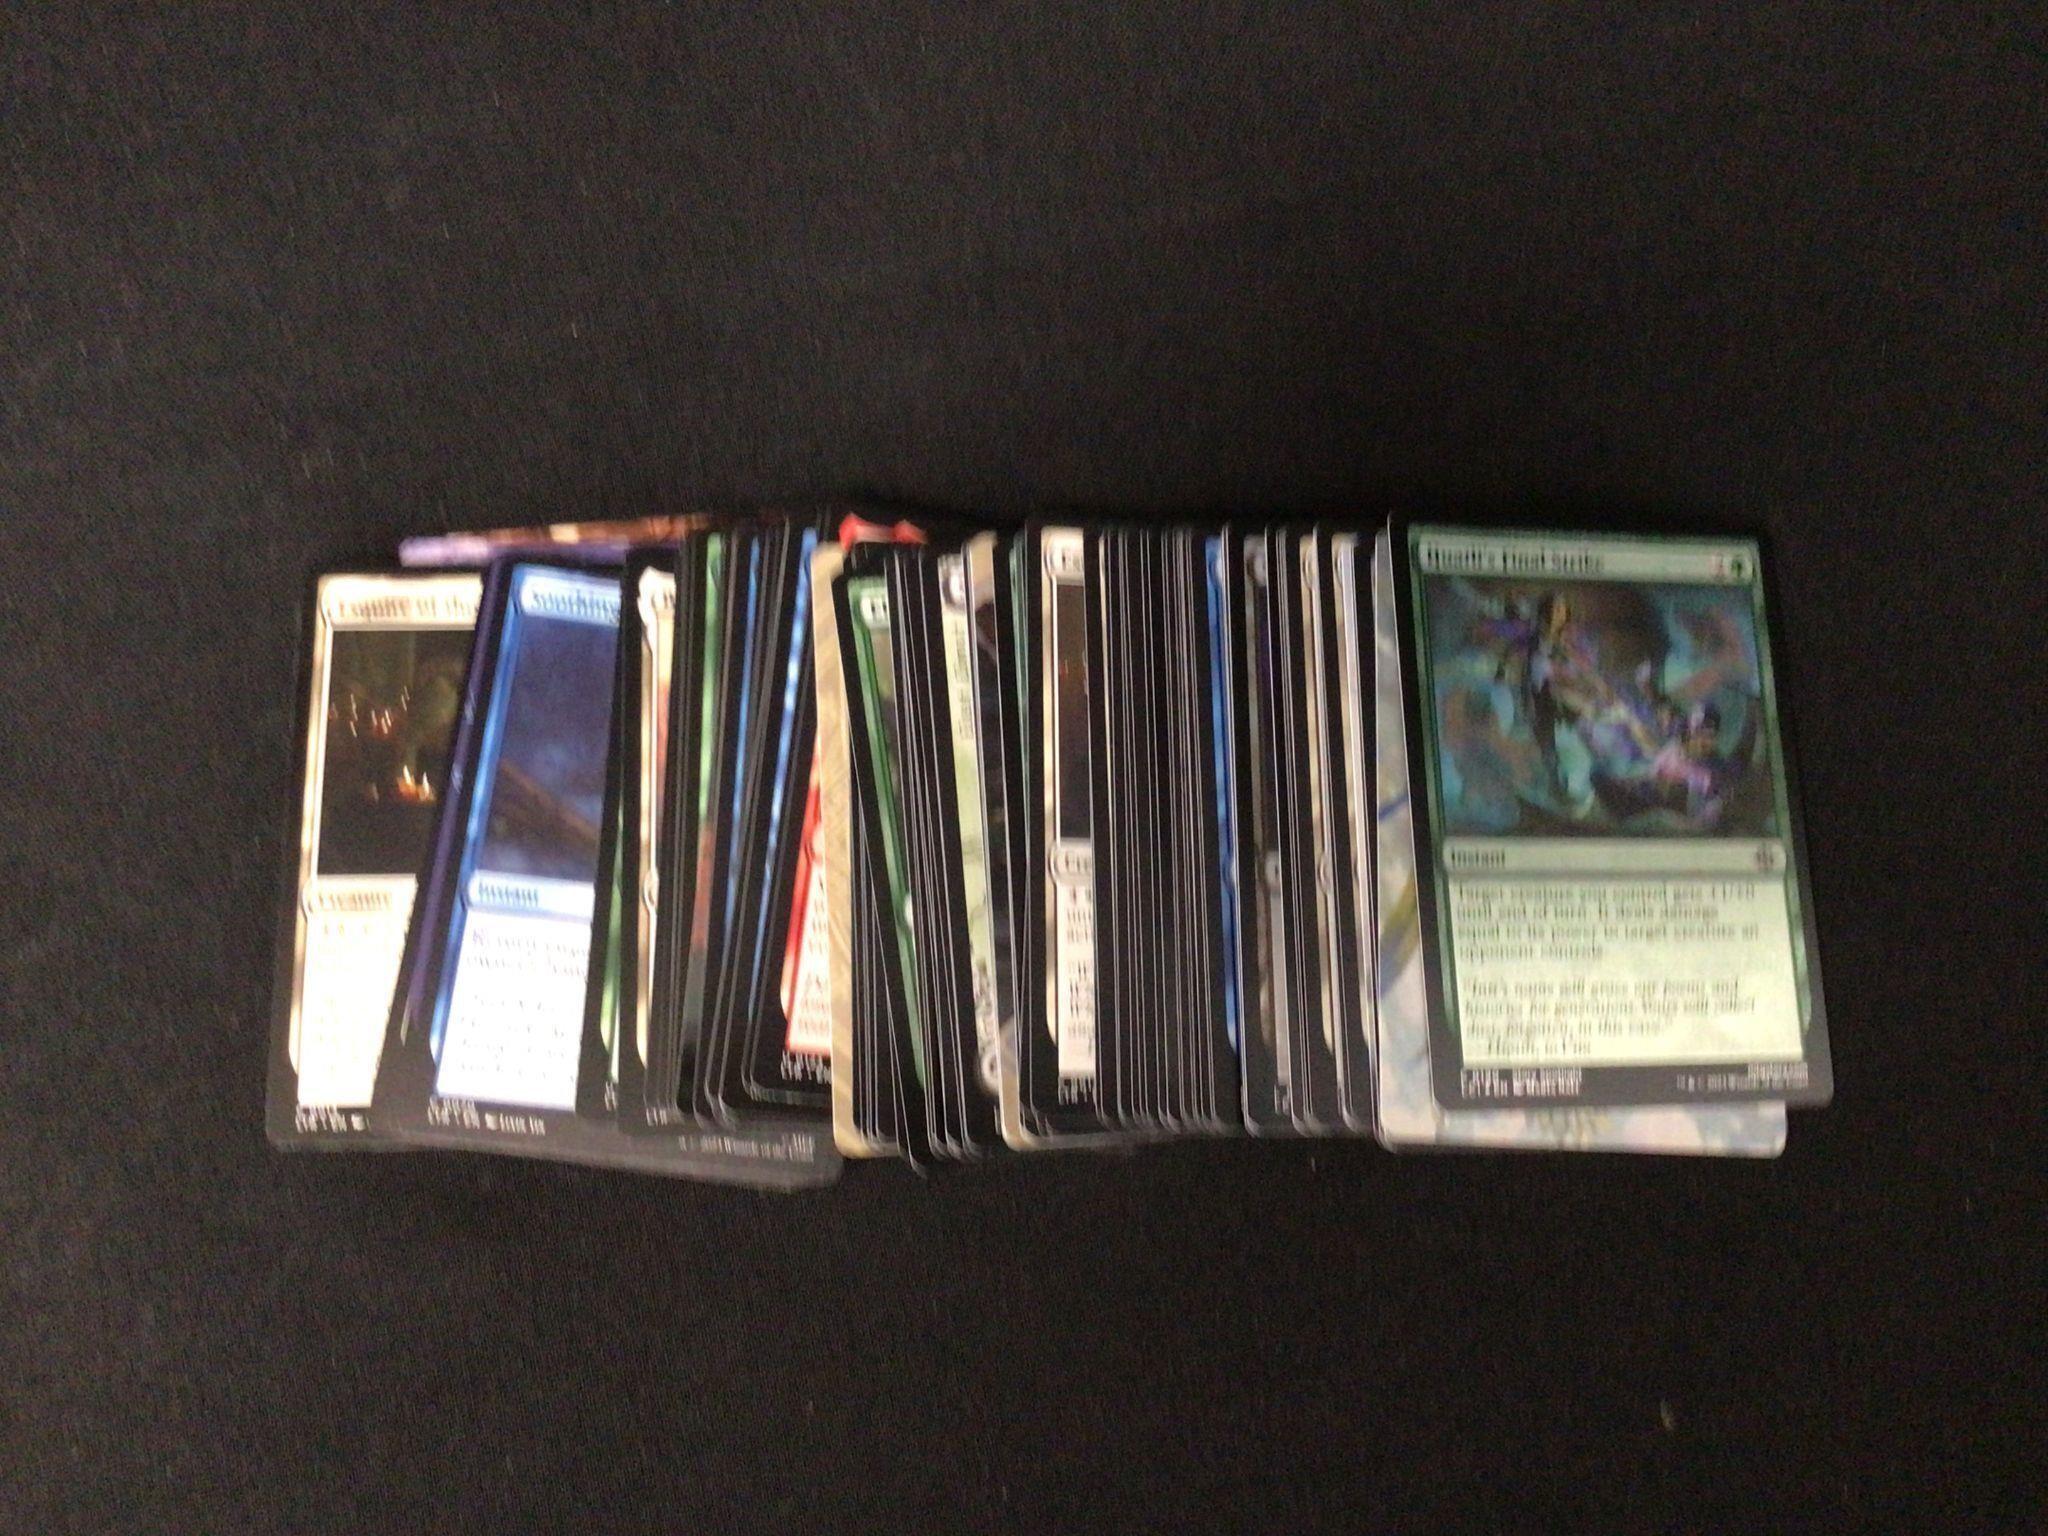 Magic the Gathering Cards Unsearched Approx 100